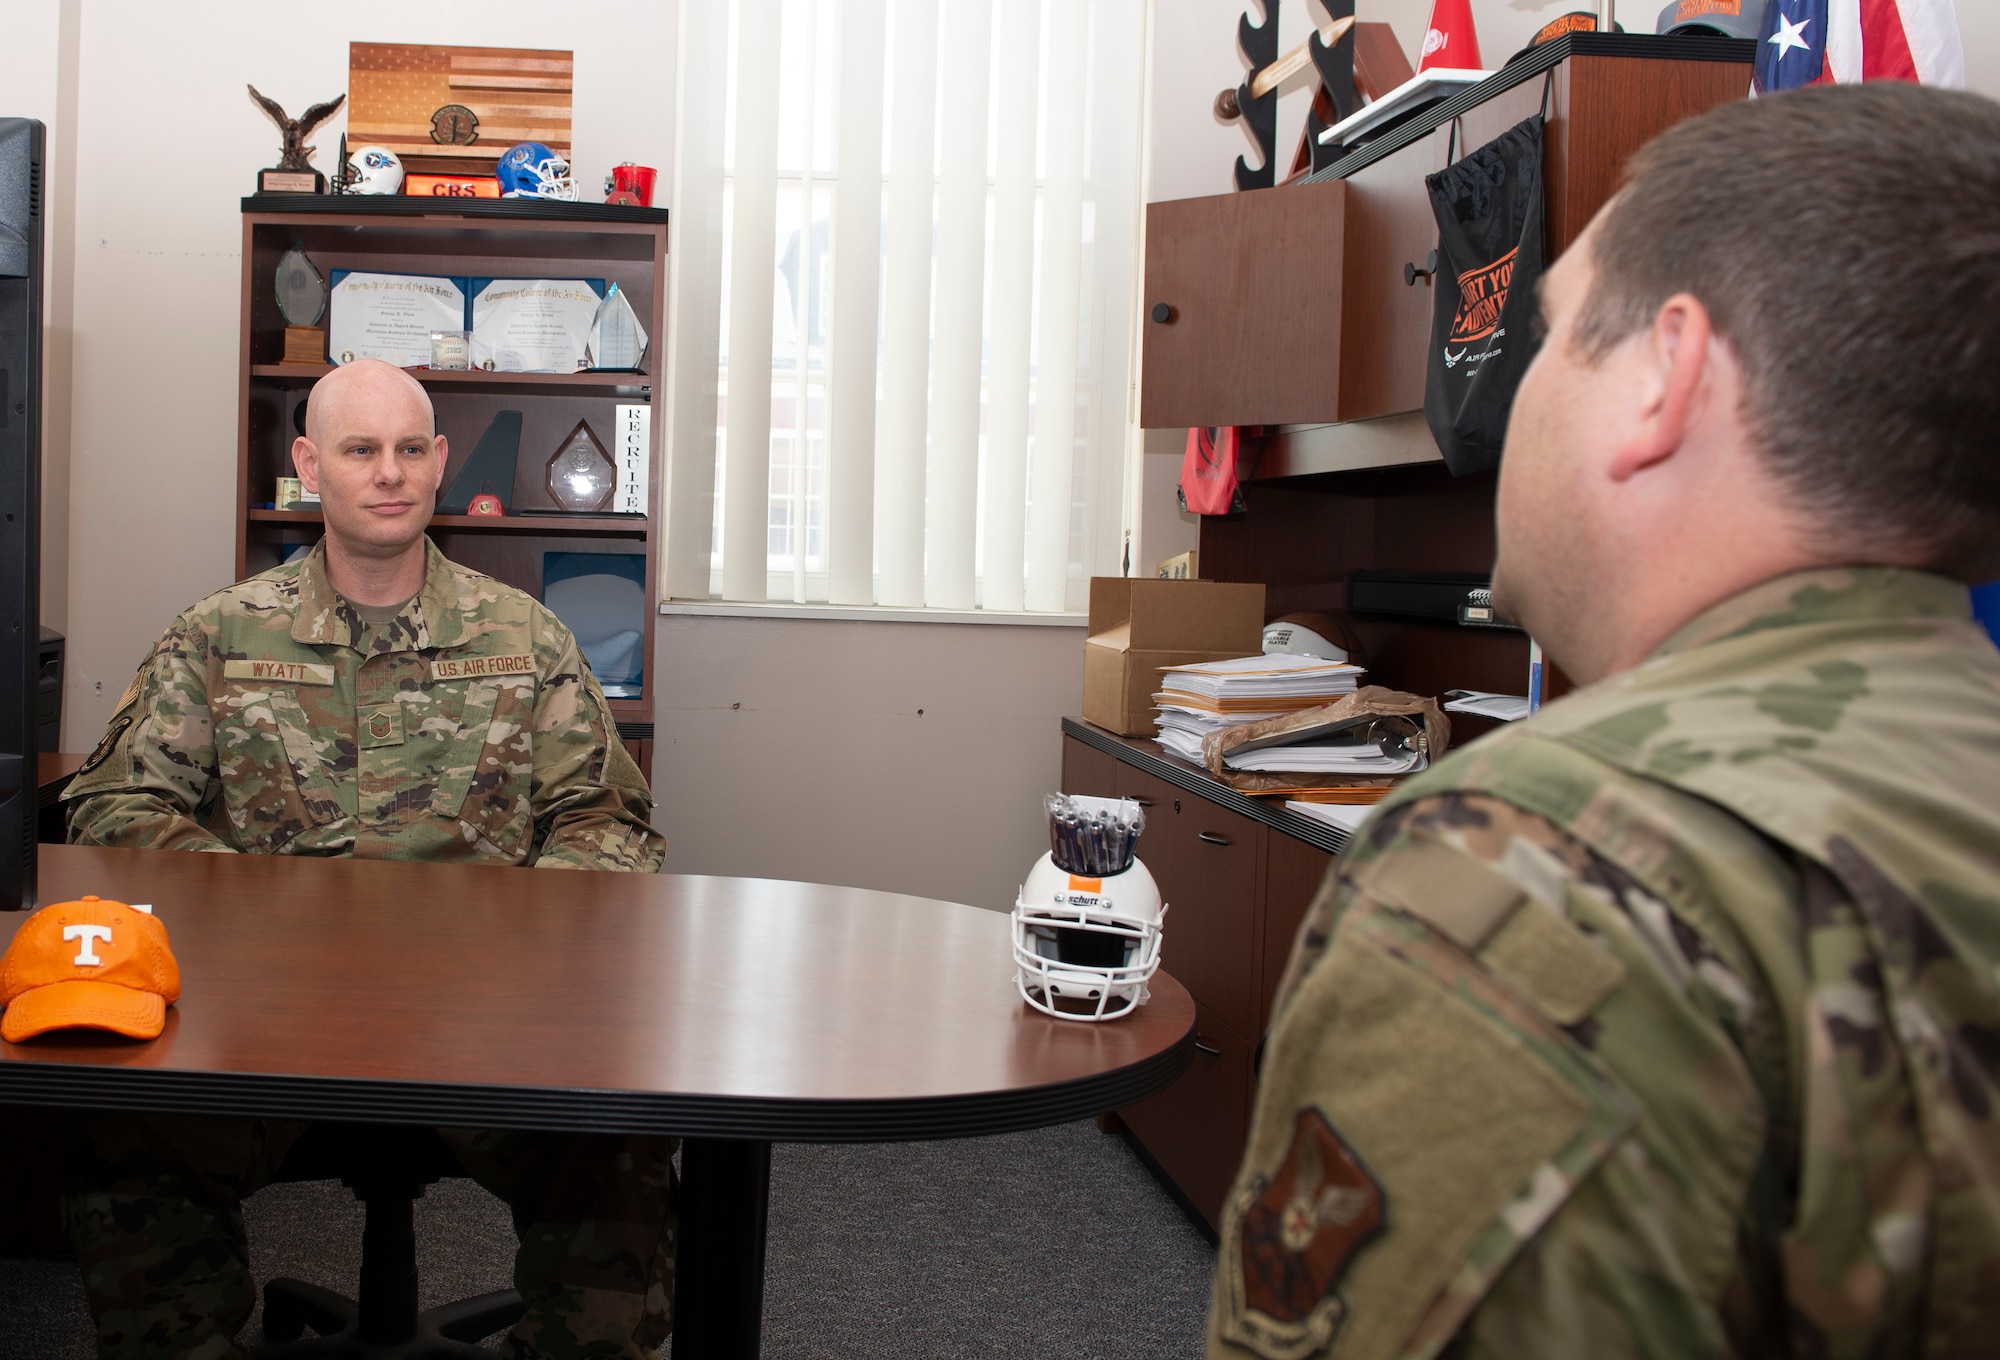 Master Sergeant sitting behind a desk in his office, listening to Airmen seated in front of the desk